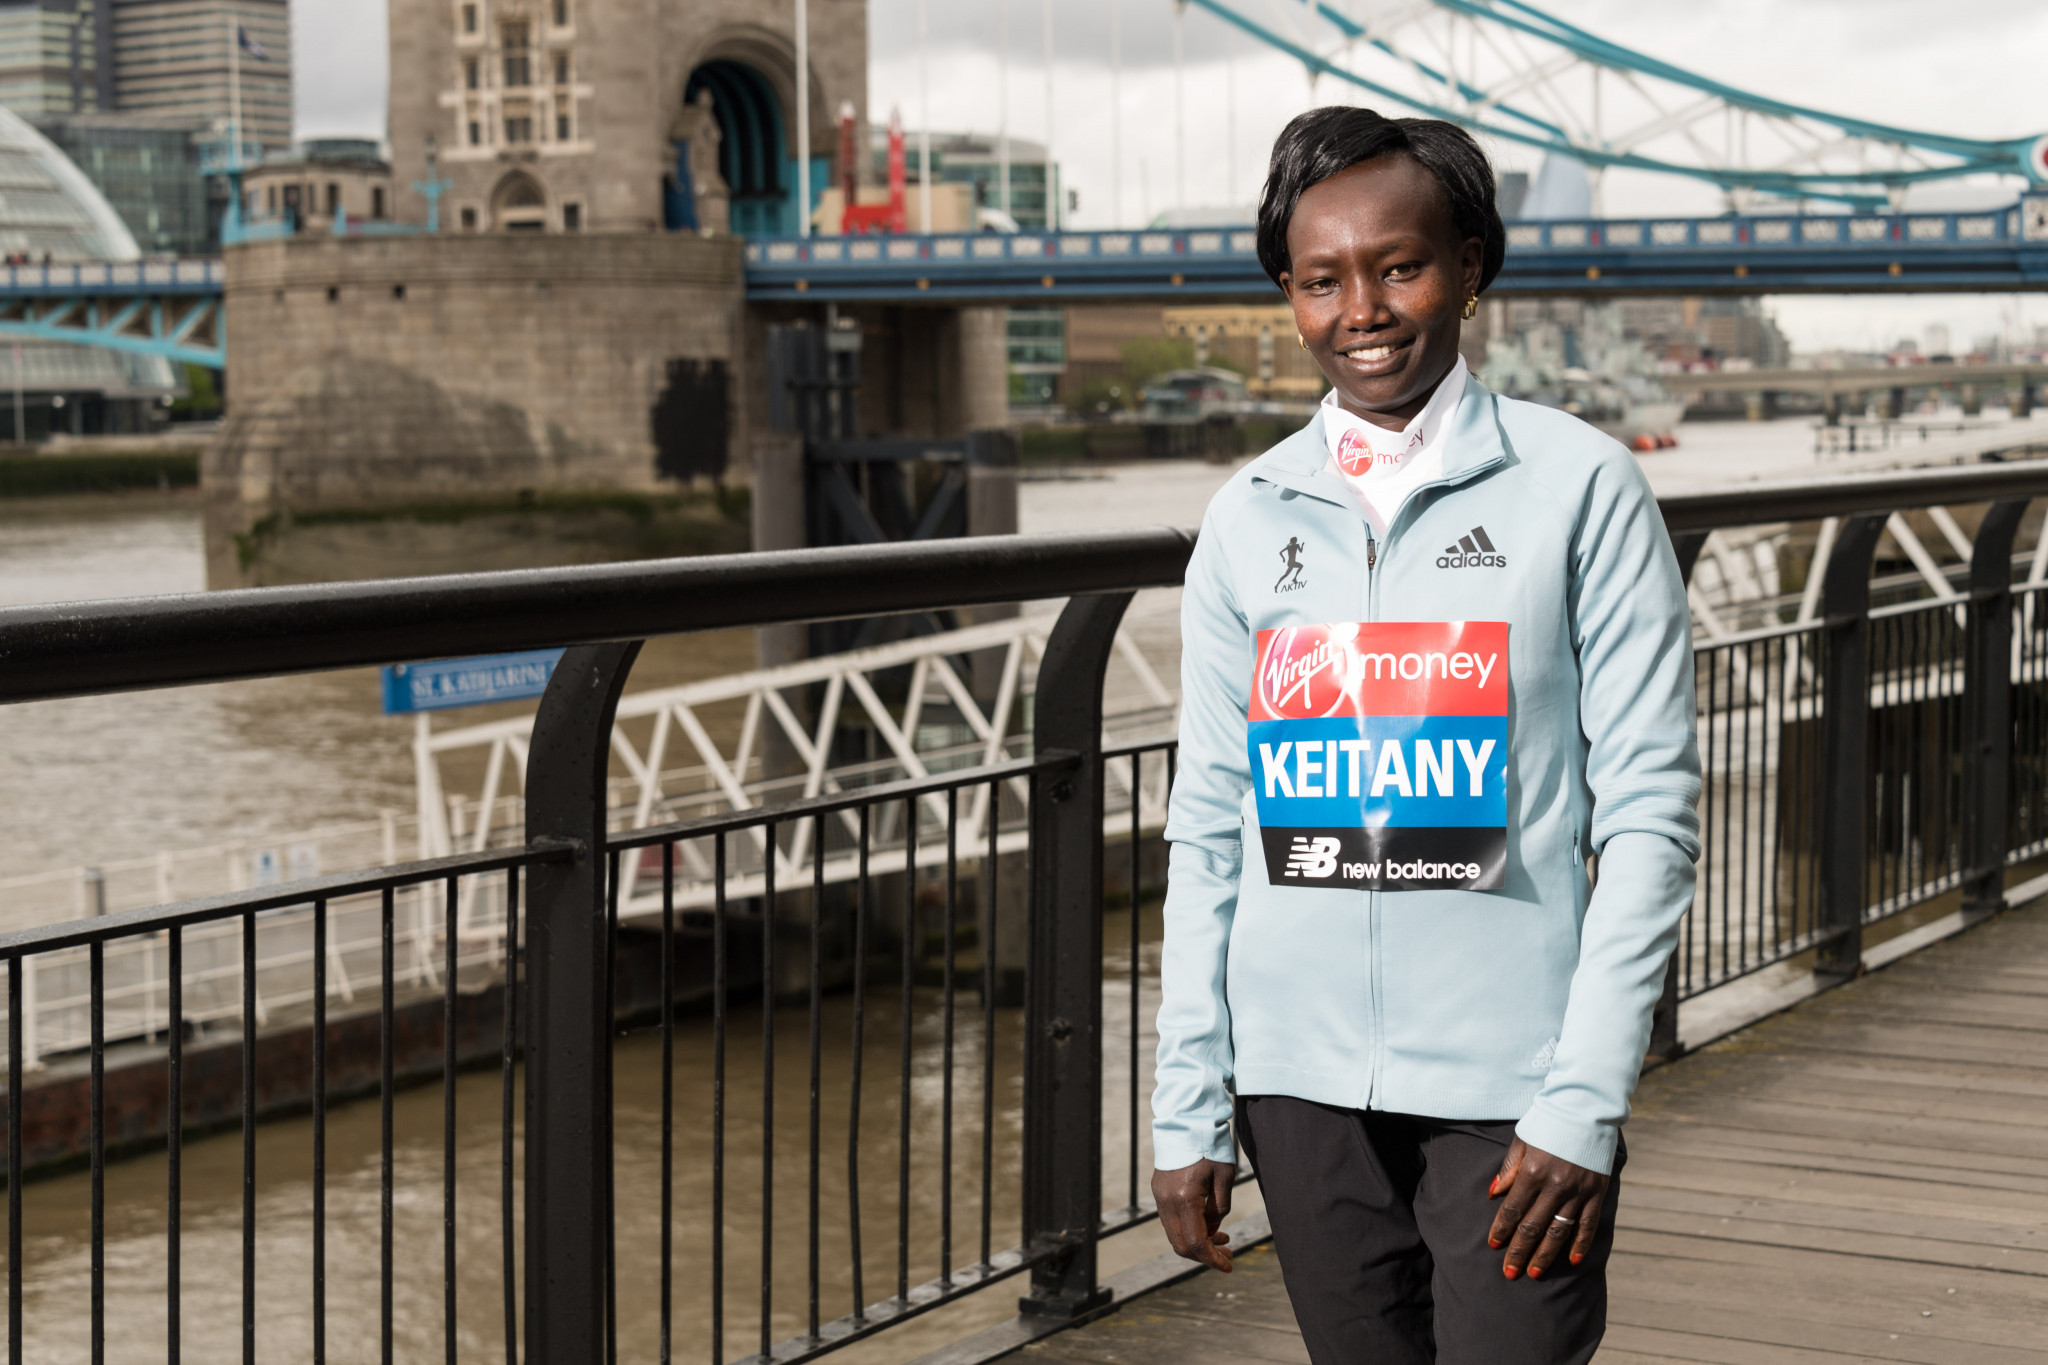 Mary Keitany will aim to win the women's race for the fourth time ©Getty Images